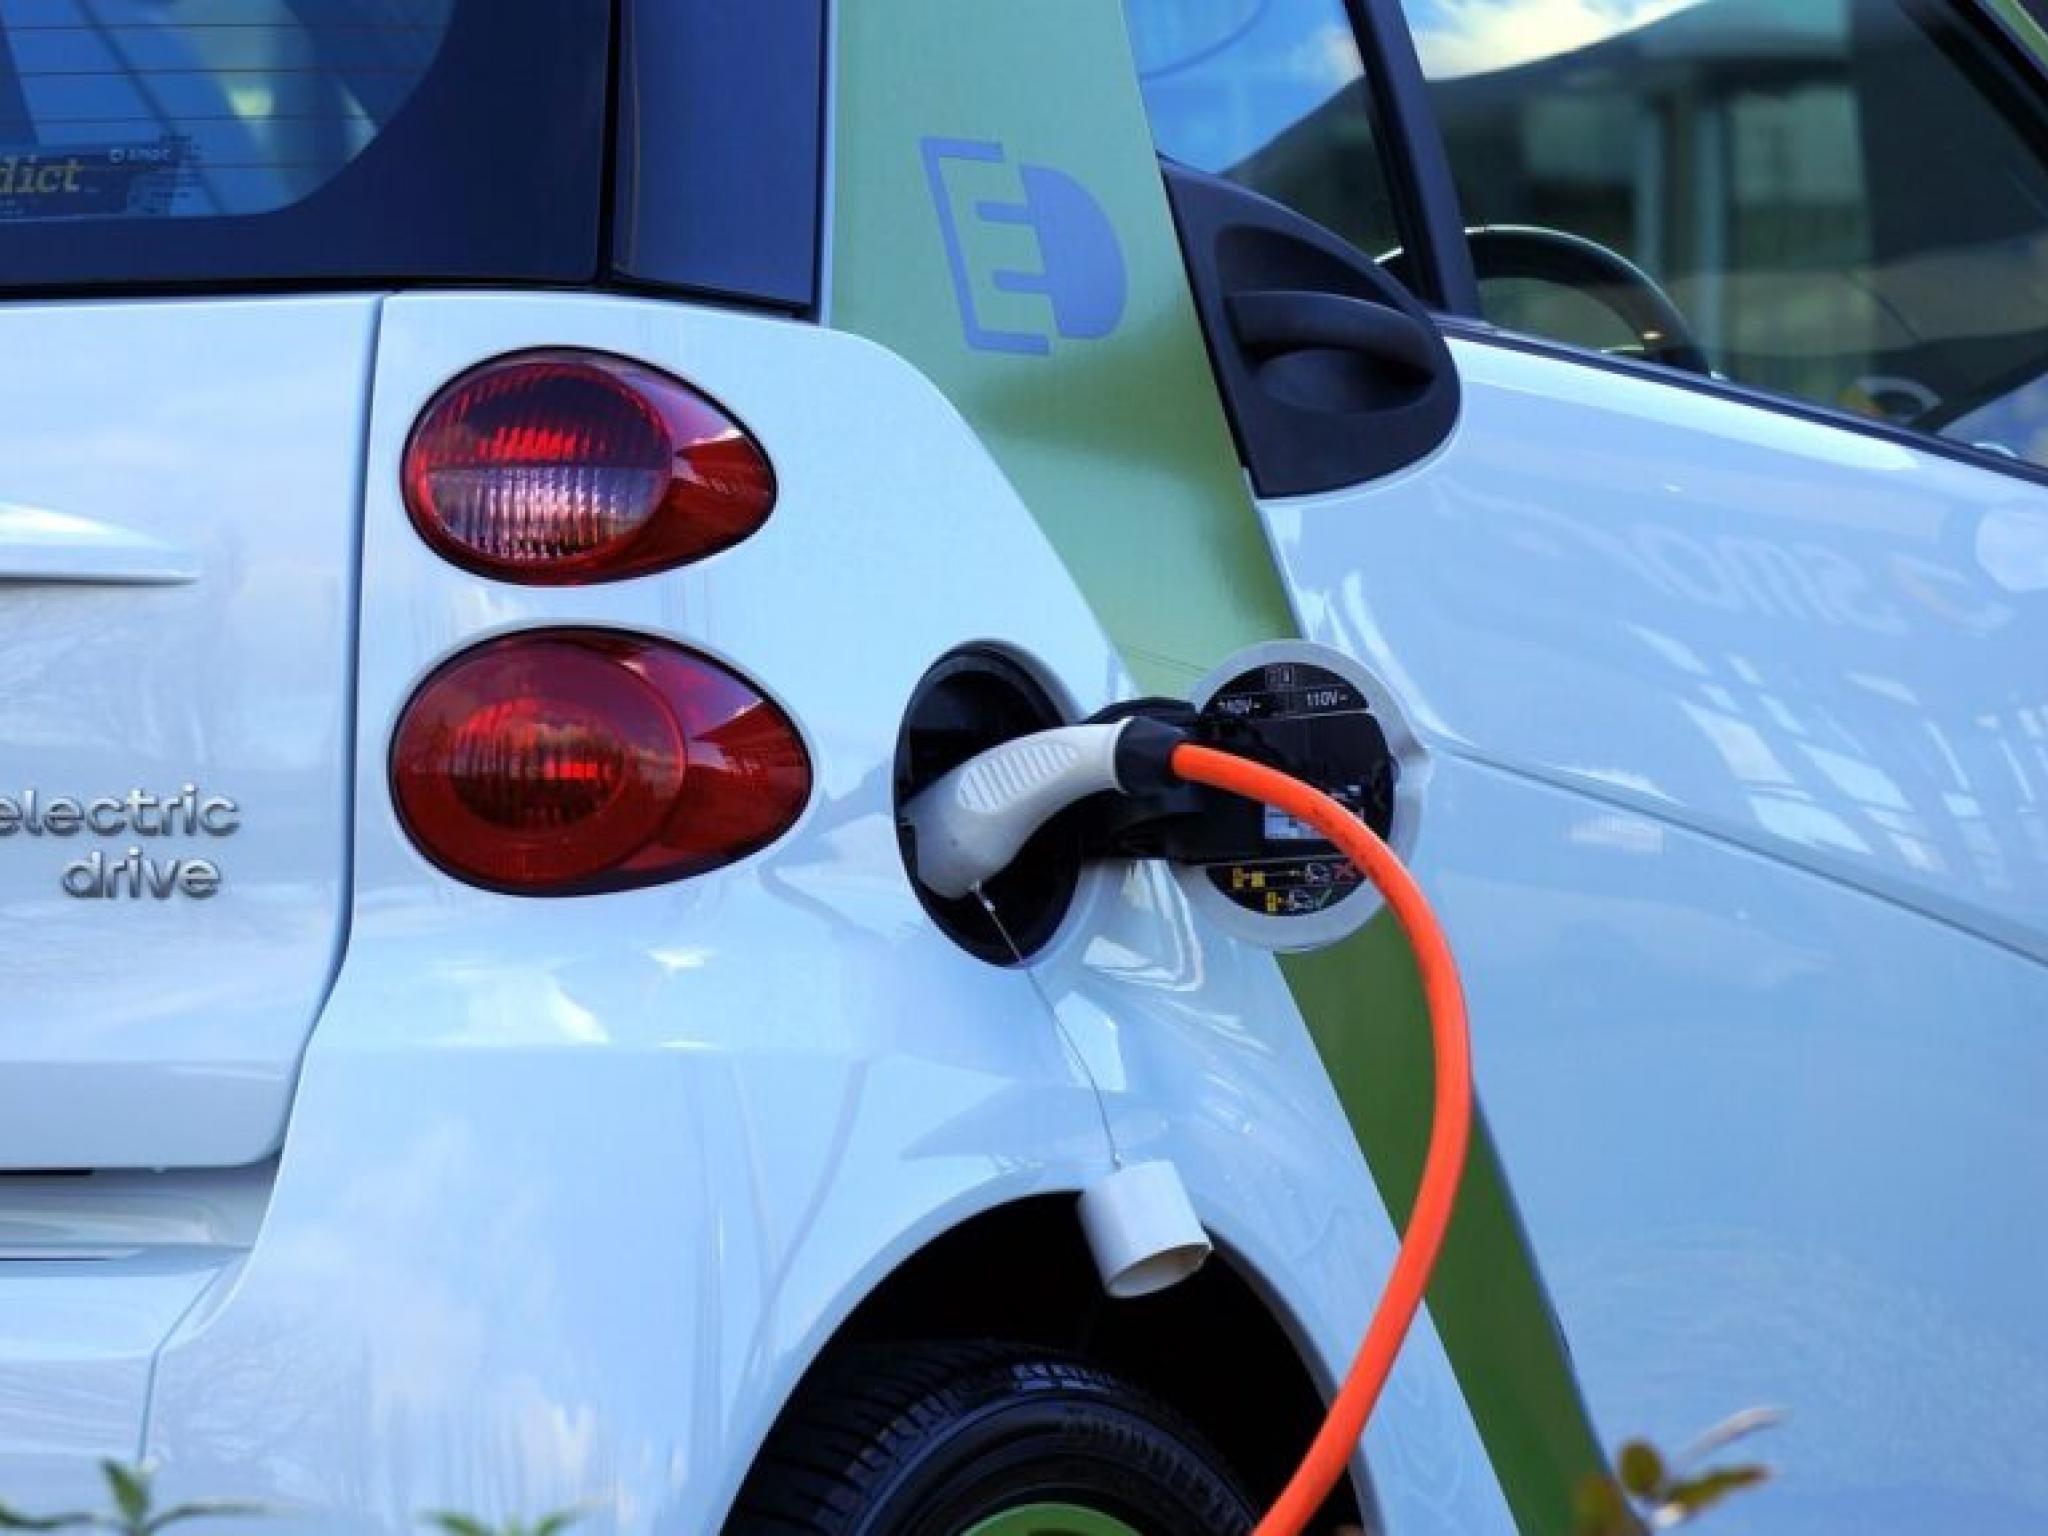  hybrid-vehicle-adoption-key-implications-for-lithium-rare-earths-copper-and-aluminum-investors 